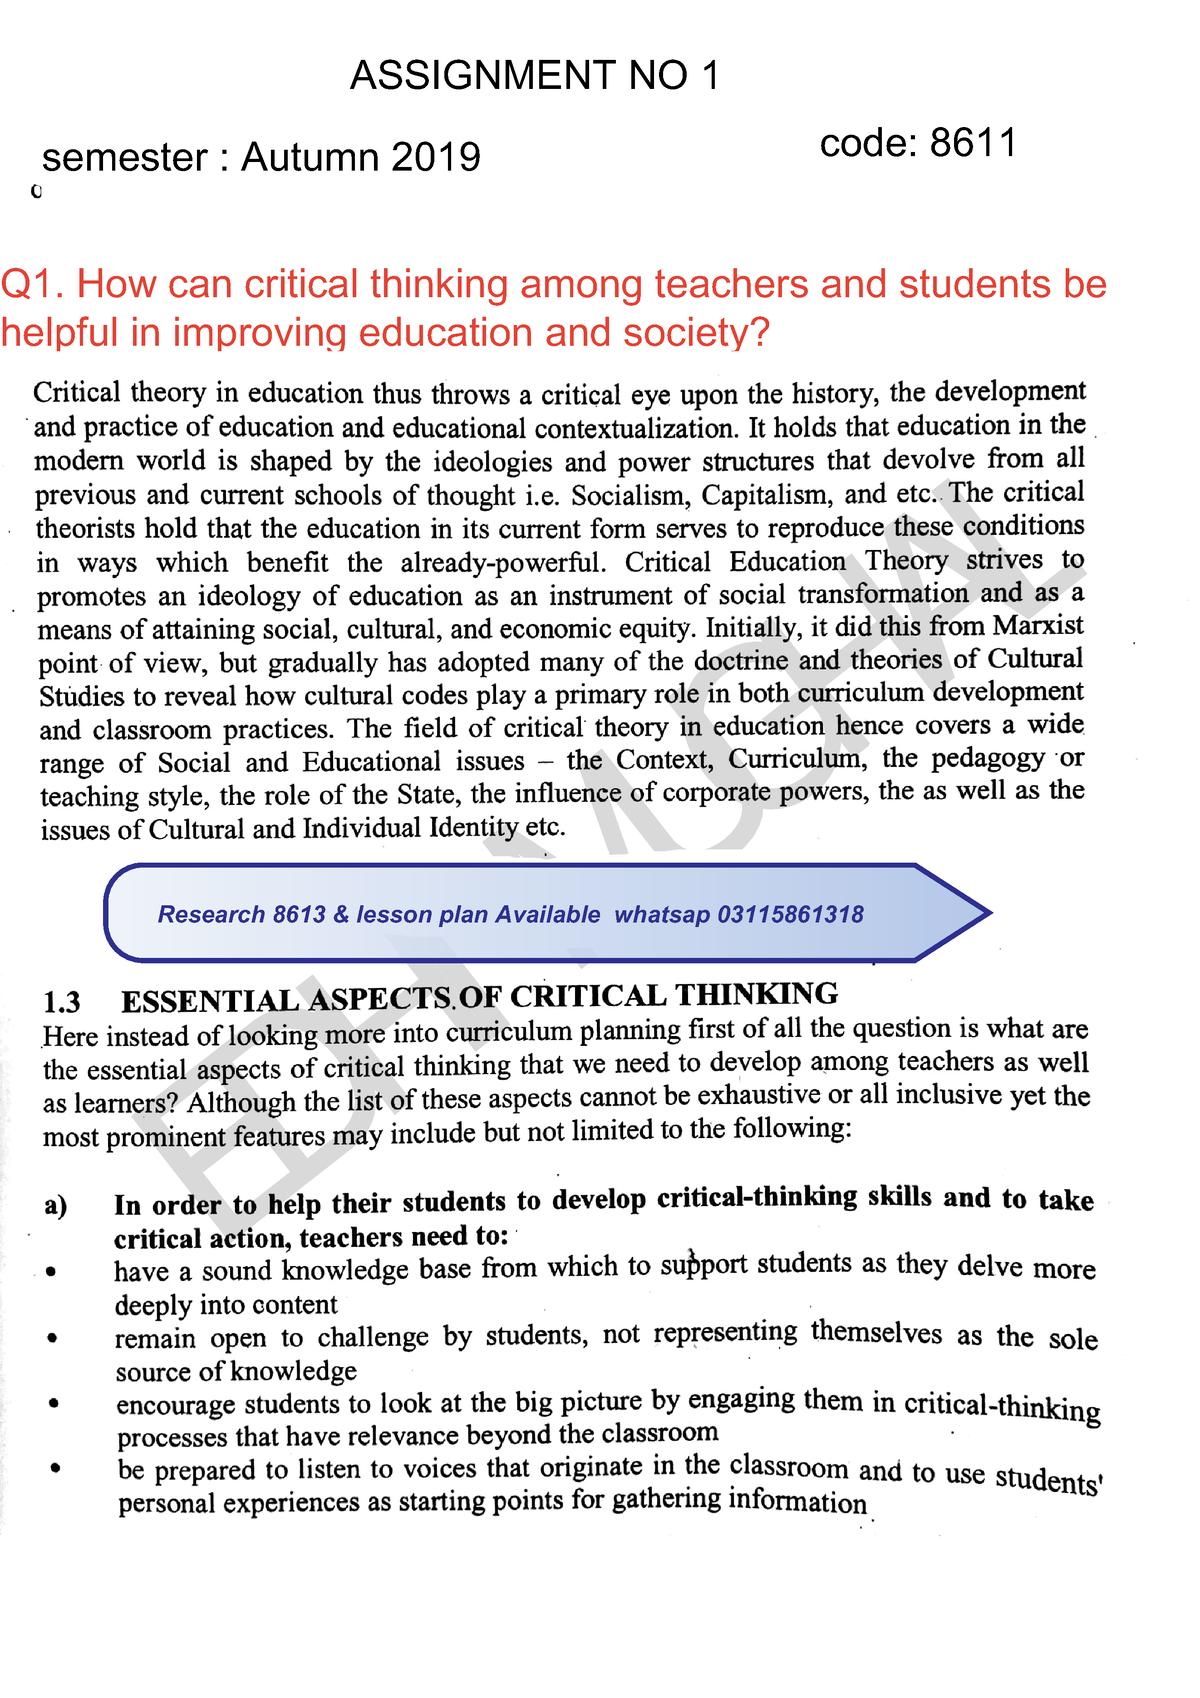 critical thinking and reflective practices 8611 pdf book in english